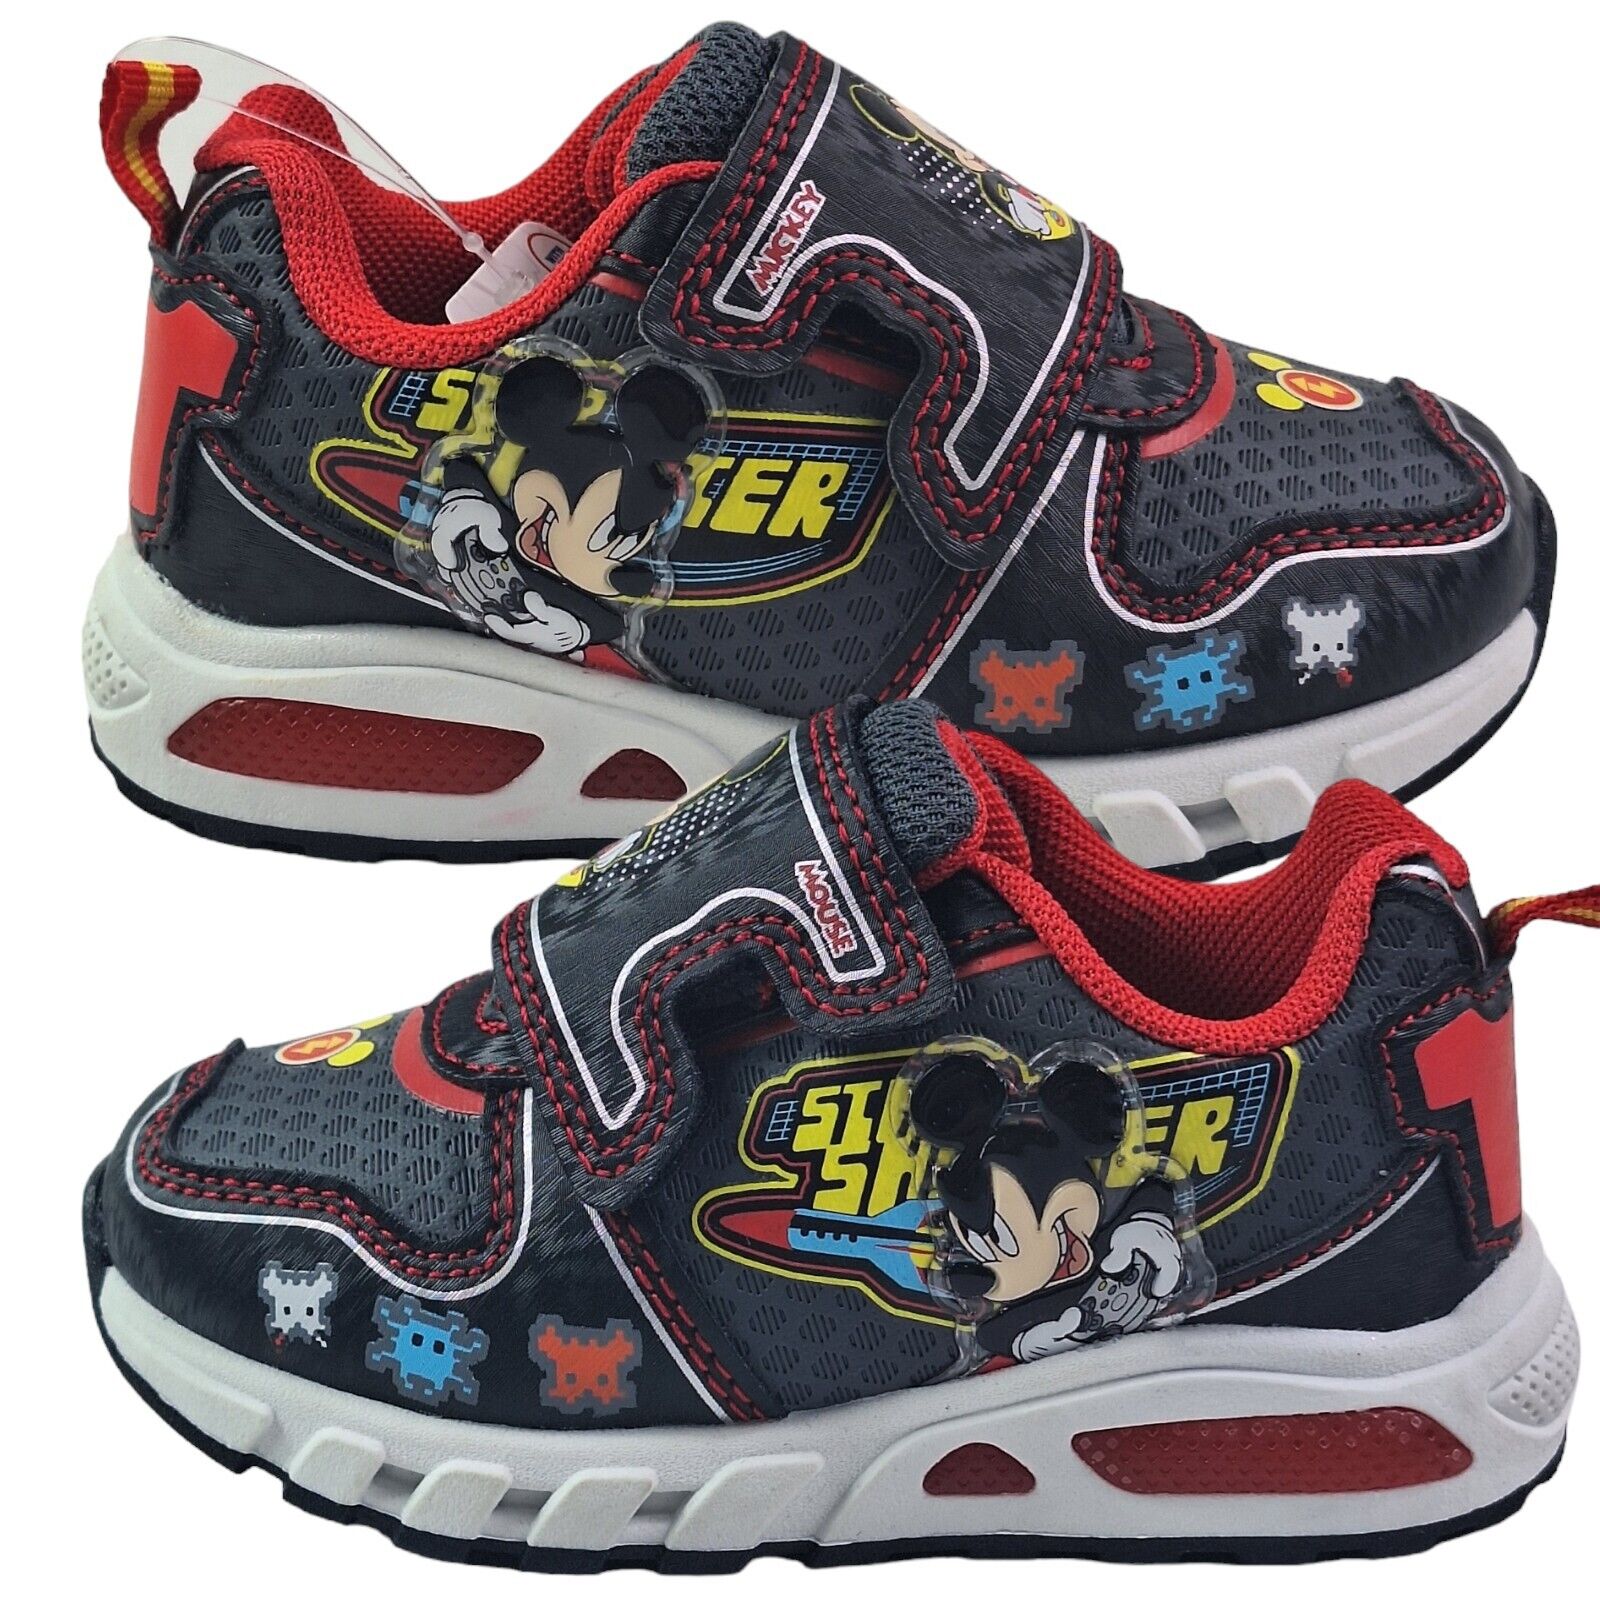 Beautiful MICKEY MOUSE DISNEY Boys Light-Up Shoes Sneakers Toddlers Size 7 new (16cm) on eBay